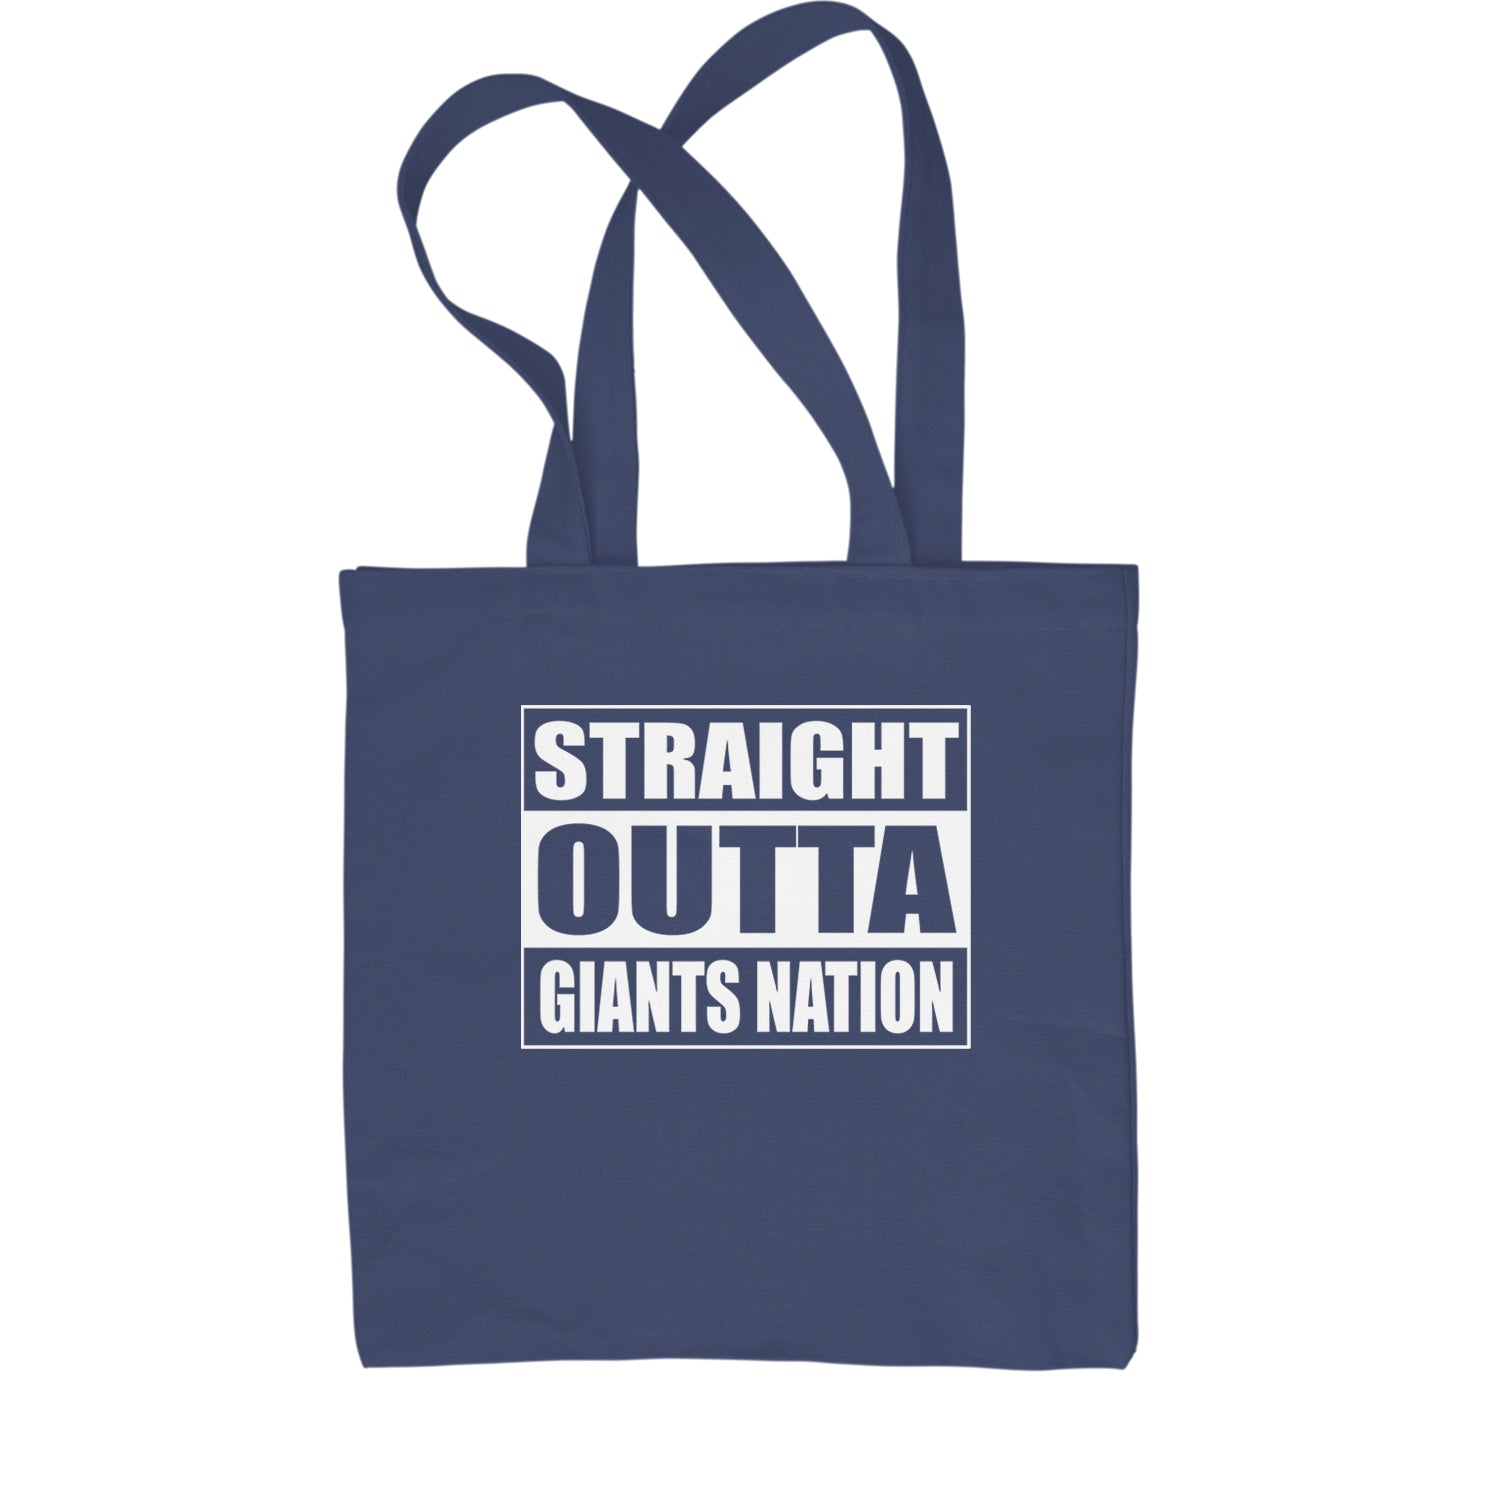 Straight Outta Giants Nation Shopping Tote Bag bleed, blue, football, giants, new, ny, york by Expression Tees